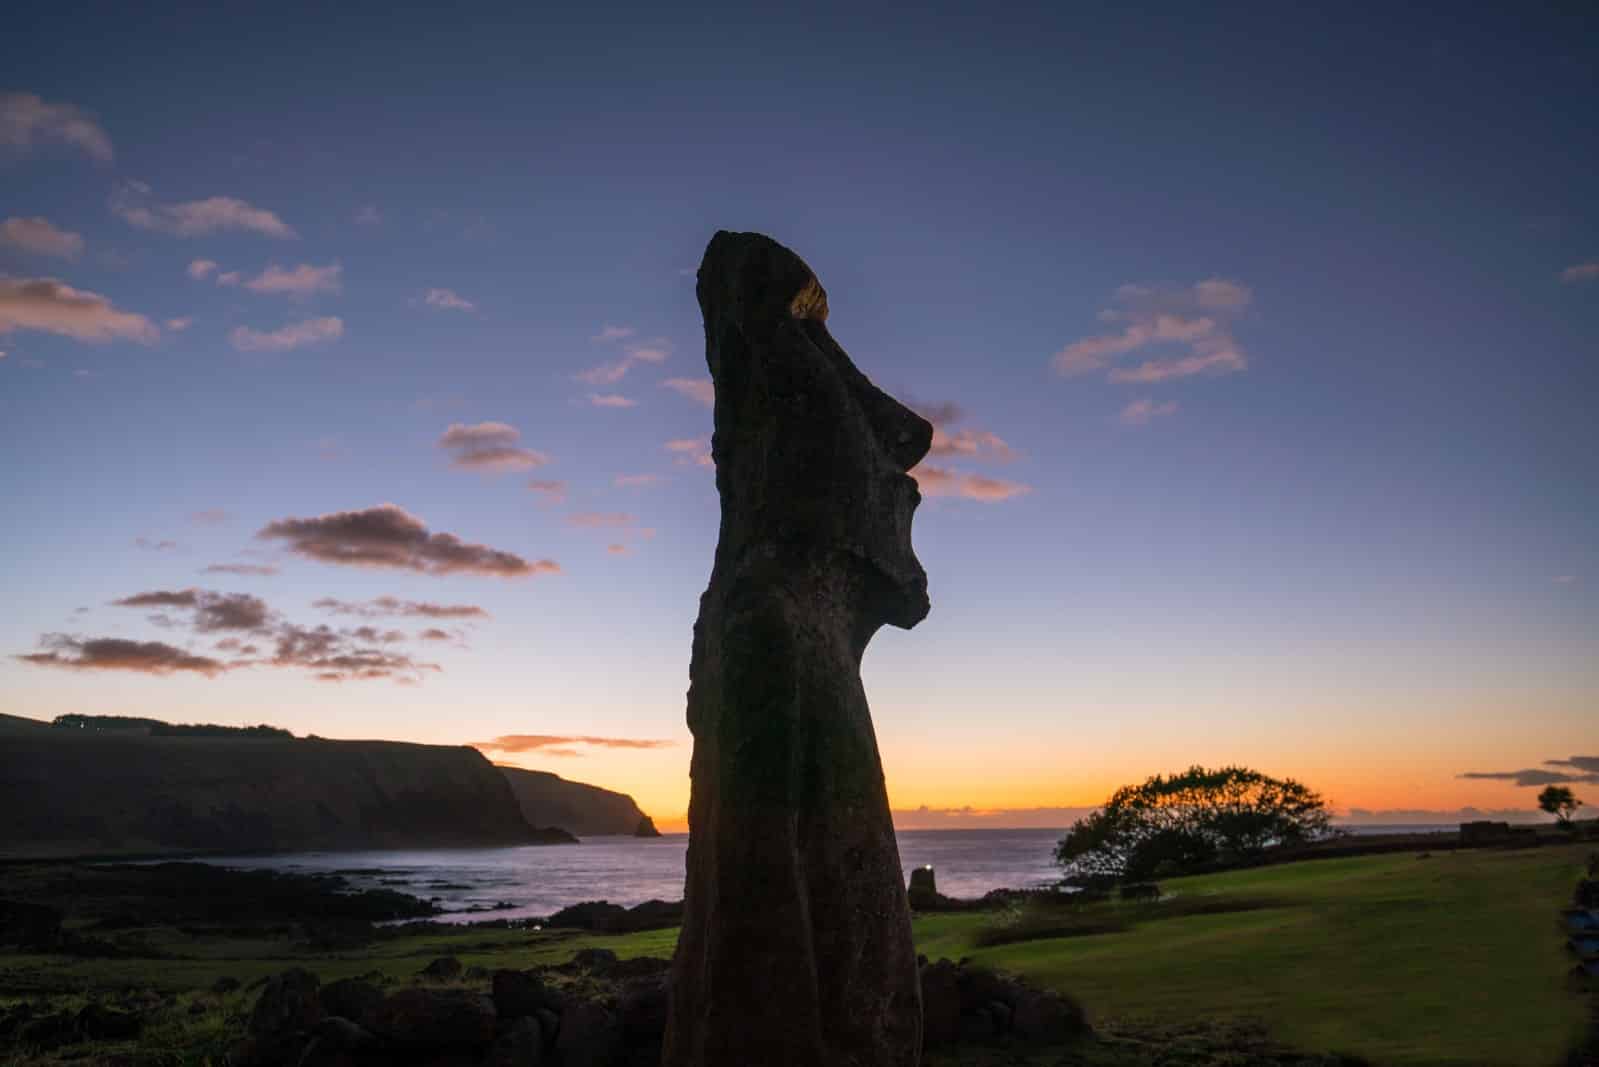 Moais at Ahu Tongariki in Easter island, Chile